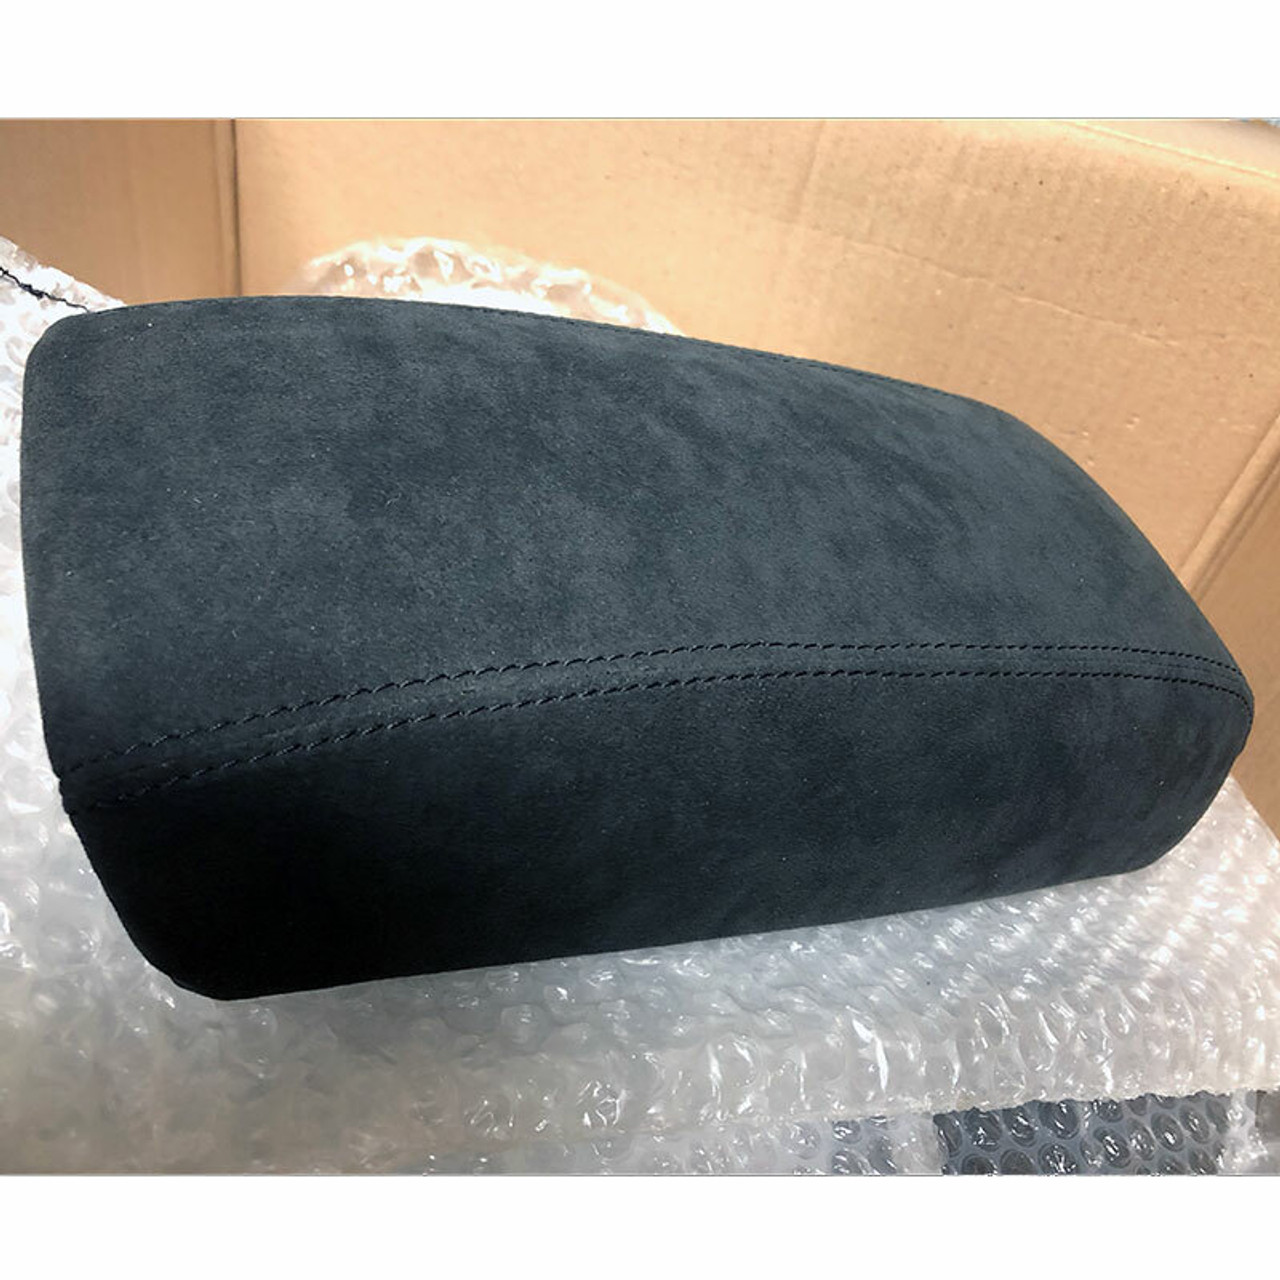 https://cdn11.bigcommerce.com/s-8ccba/images/stencil/1280x1280/products/8529/26159/viva-performance-volvo-850-s70v70c70-arm-rest-cover-upgrade__93573.1659679321.jpg?c=2